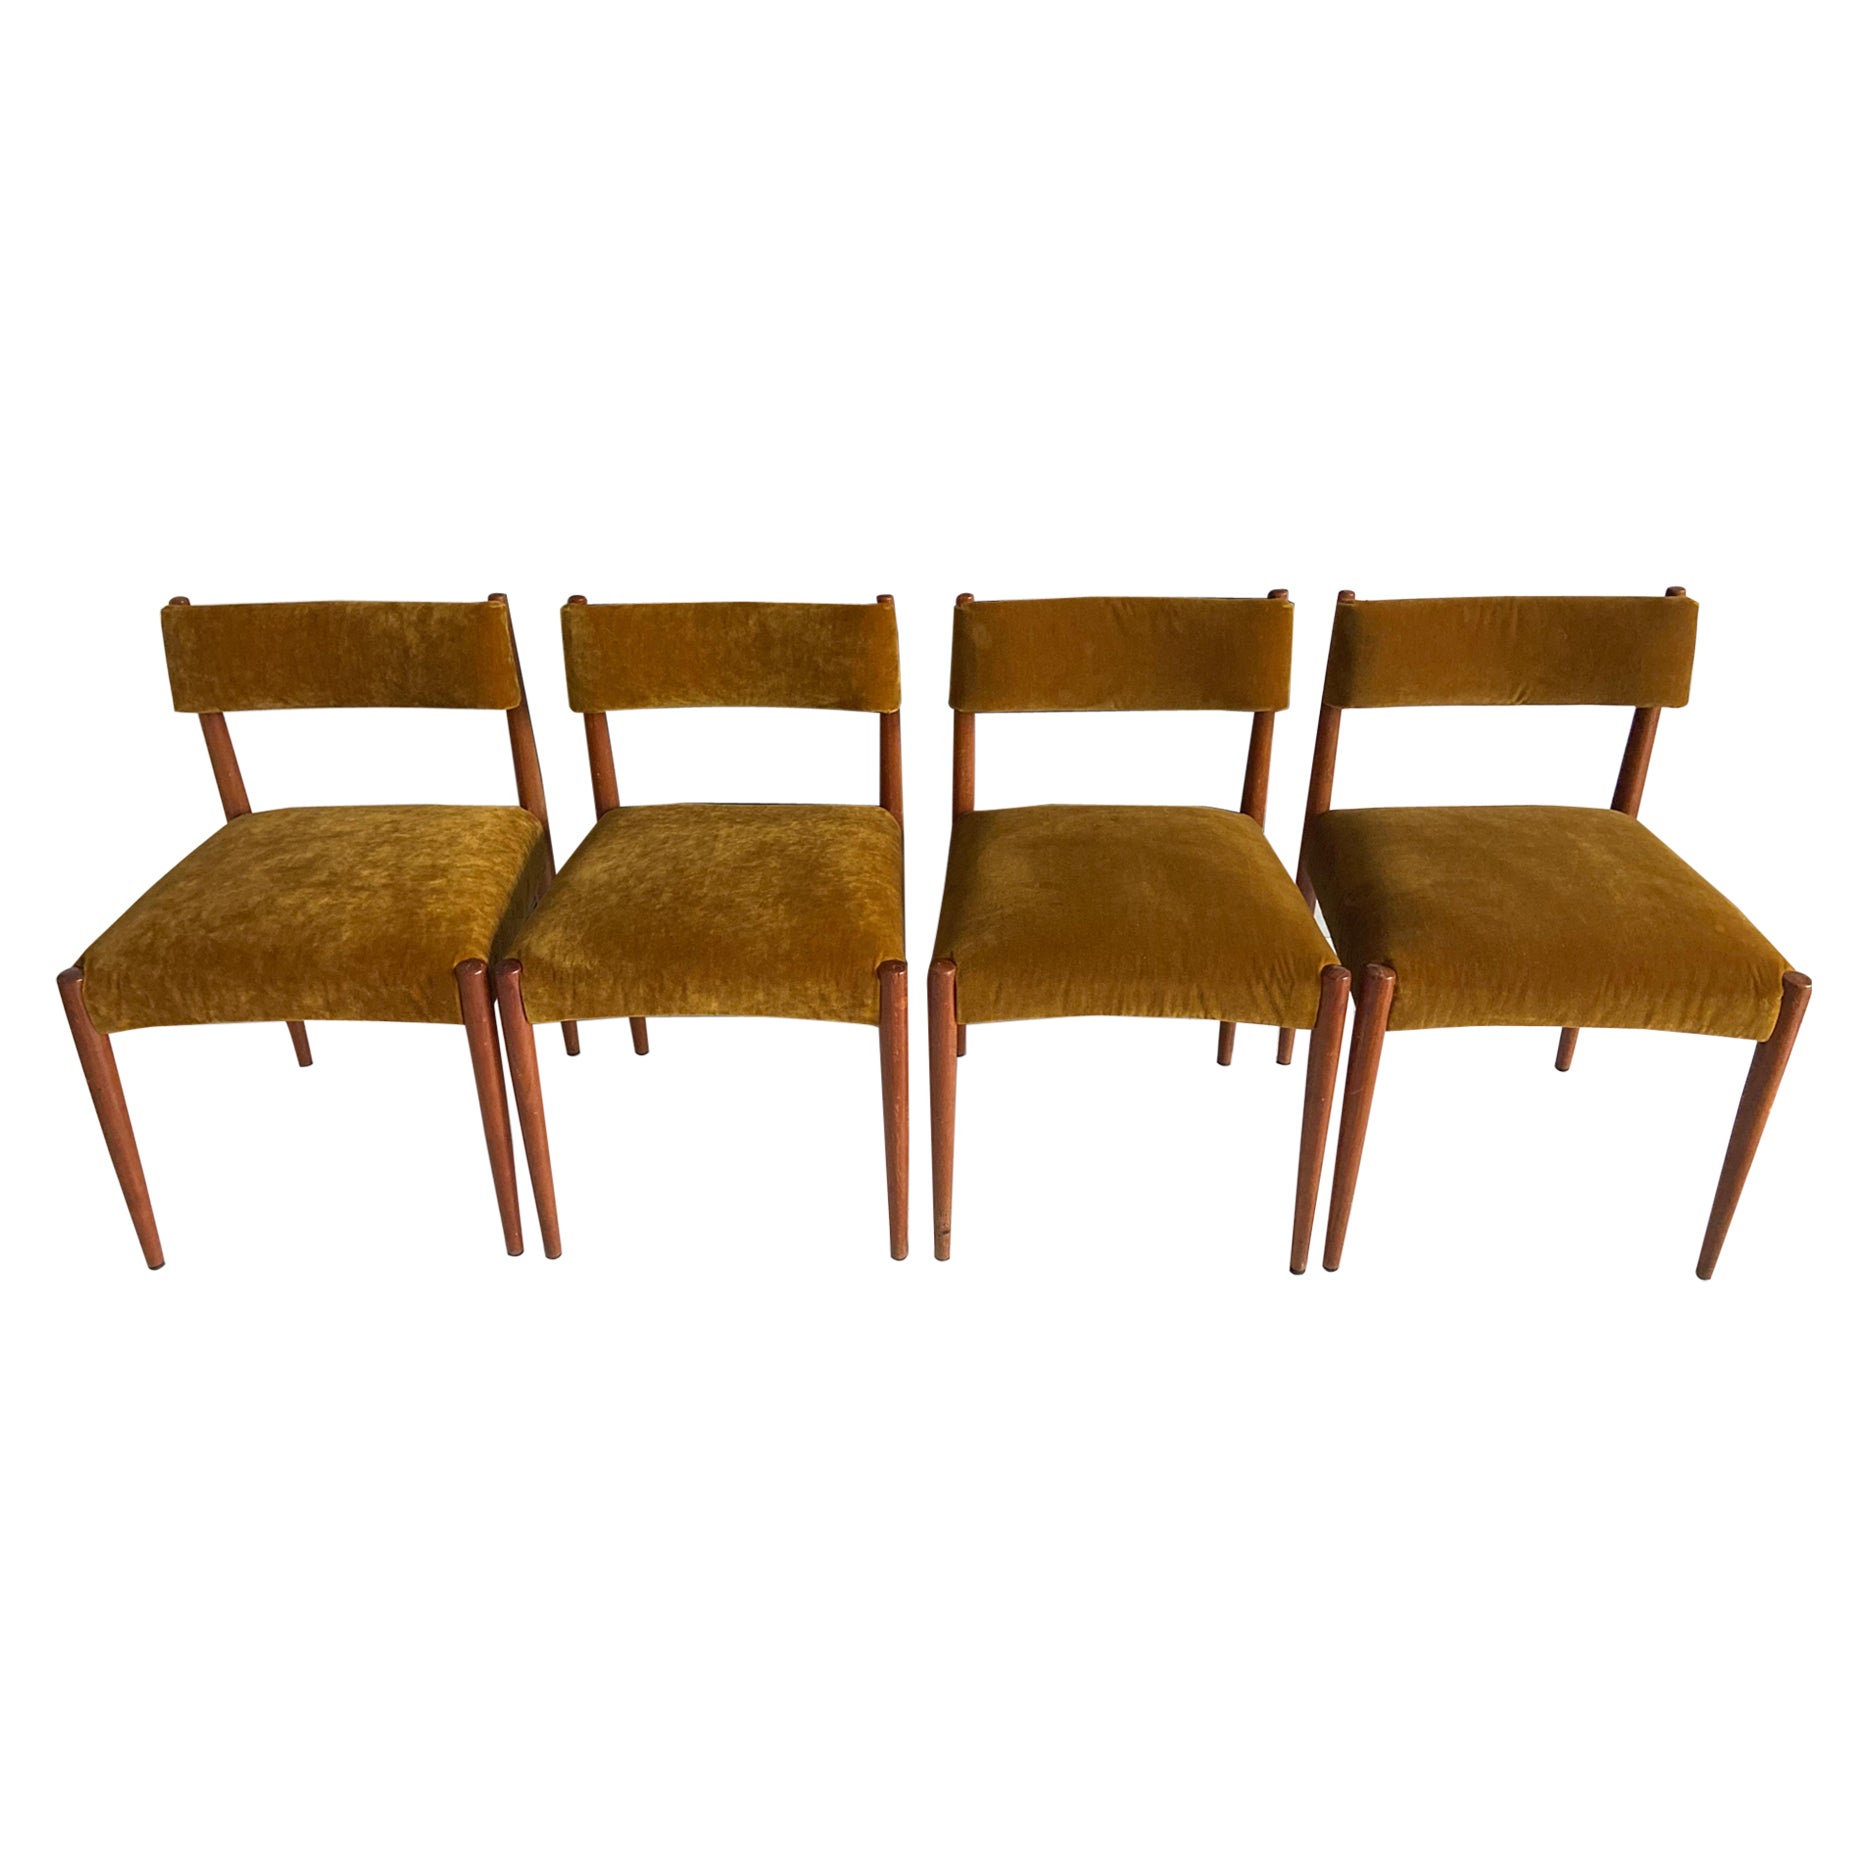 Set of 4 dining chairs For Sale